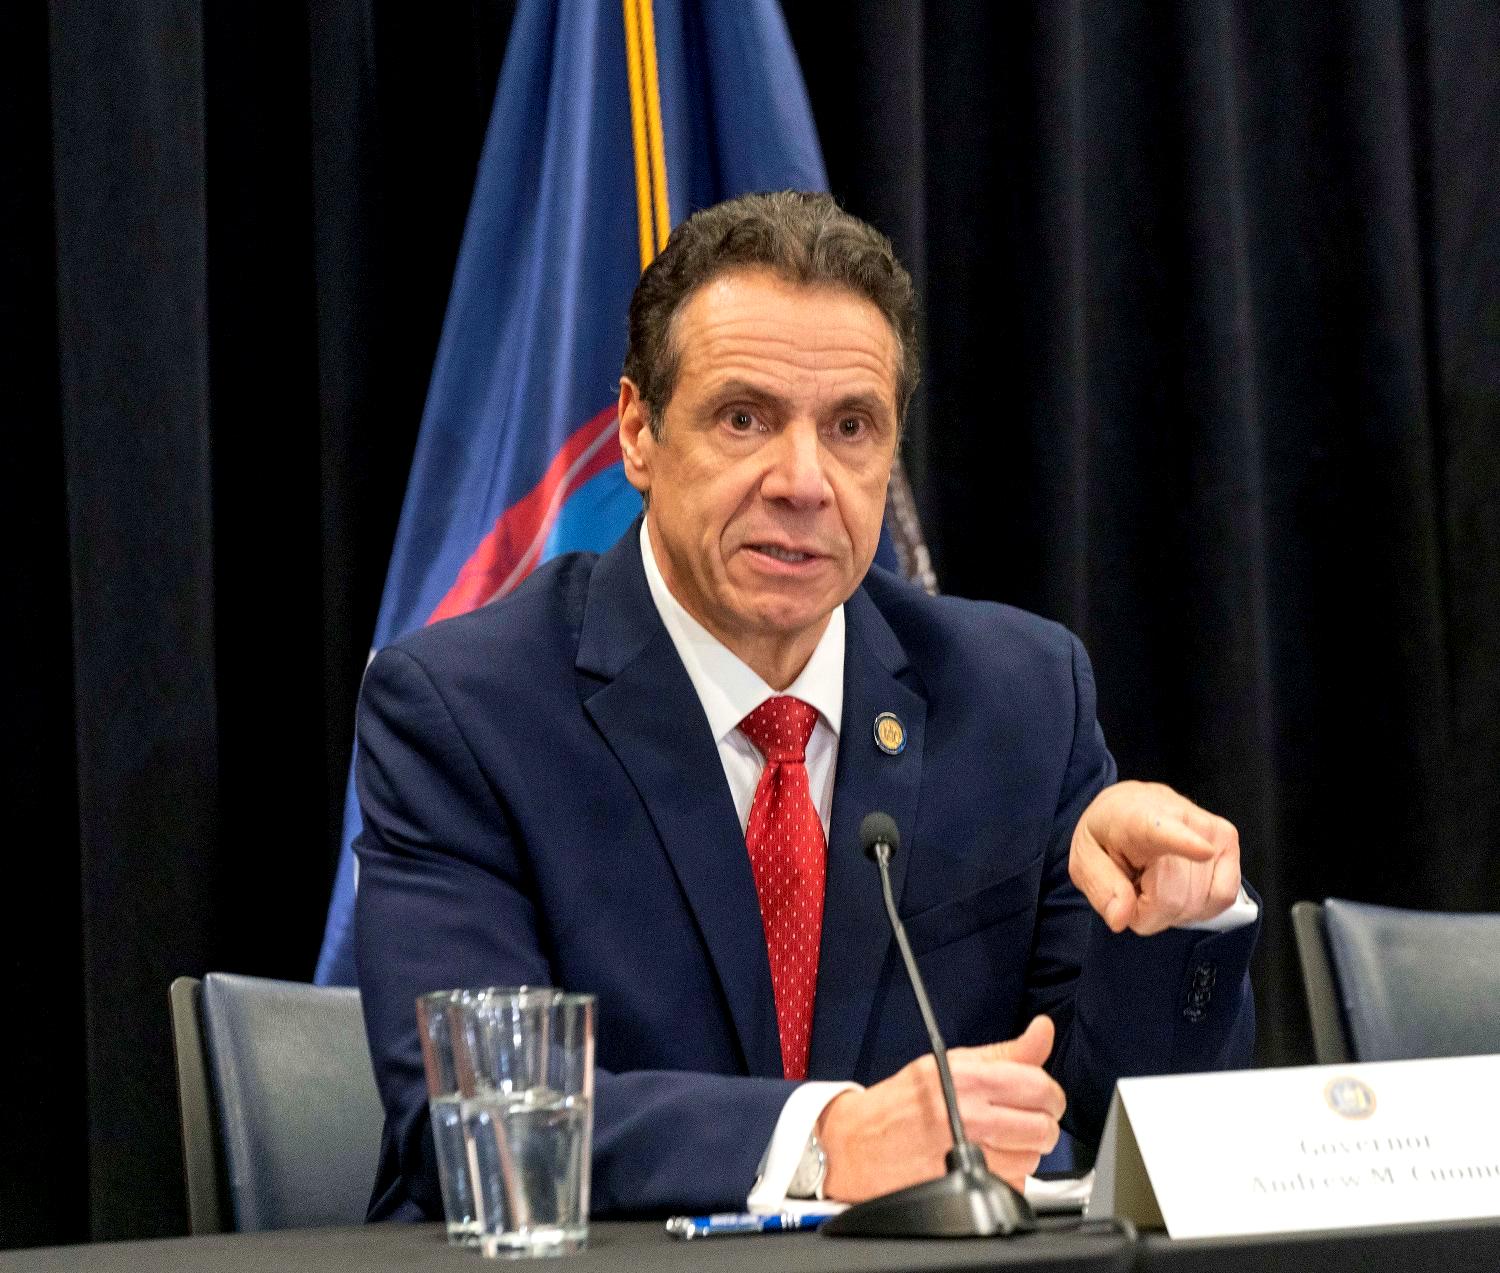 New York Governor Andrew Cuomo Resigns After Harassment Allegations